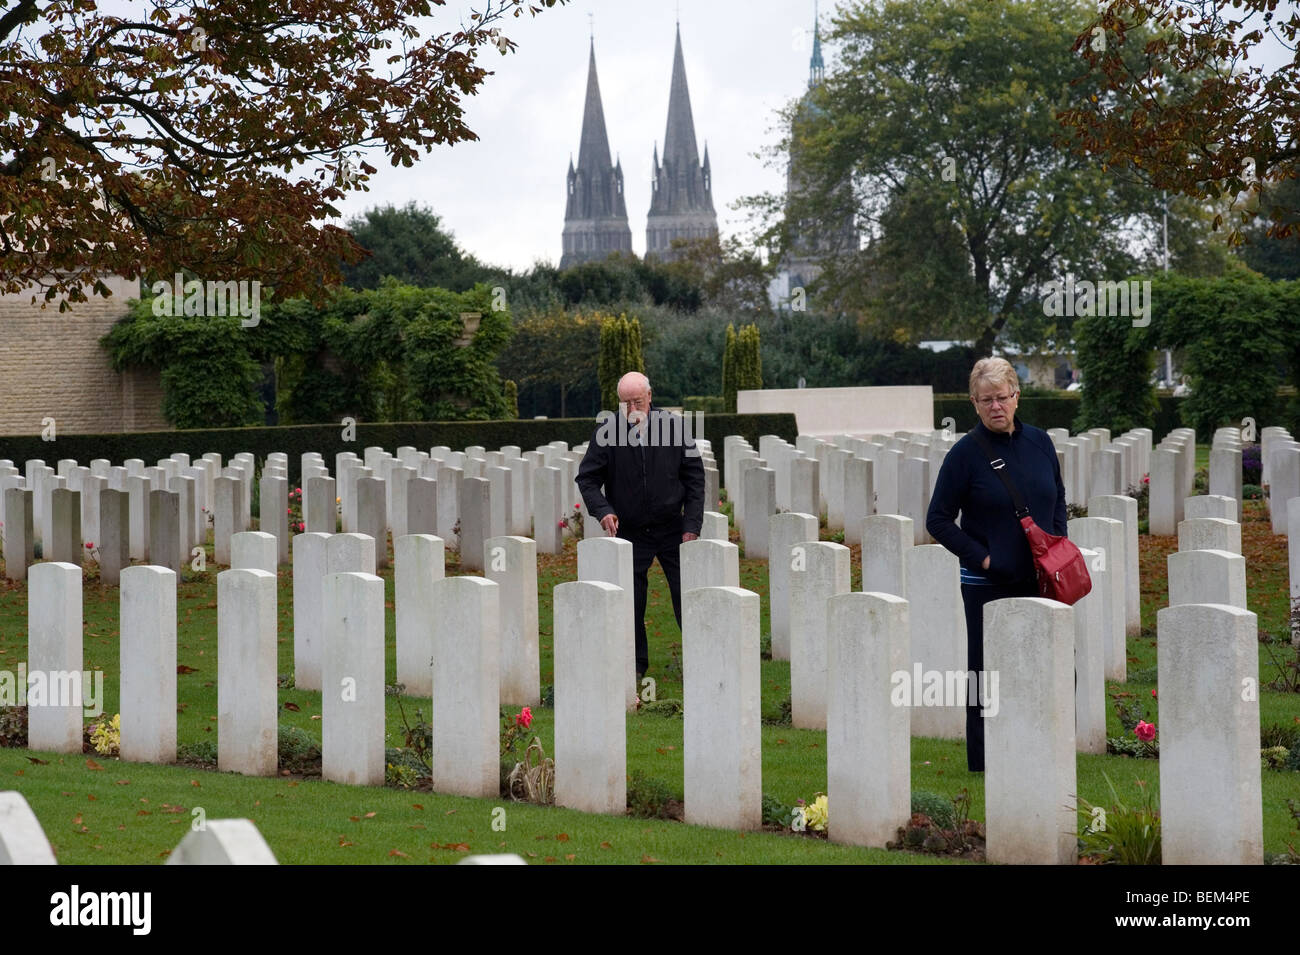 Bayeux Commonwealth War Graves Commission Cemetery,Bayeux,Normandy,France. Stock Photo